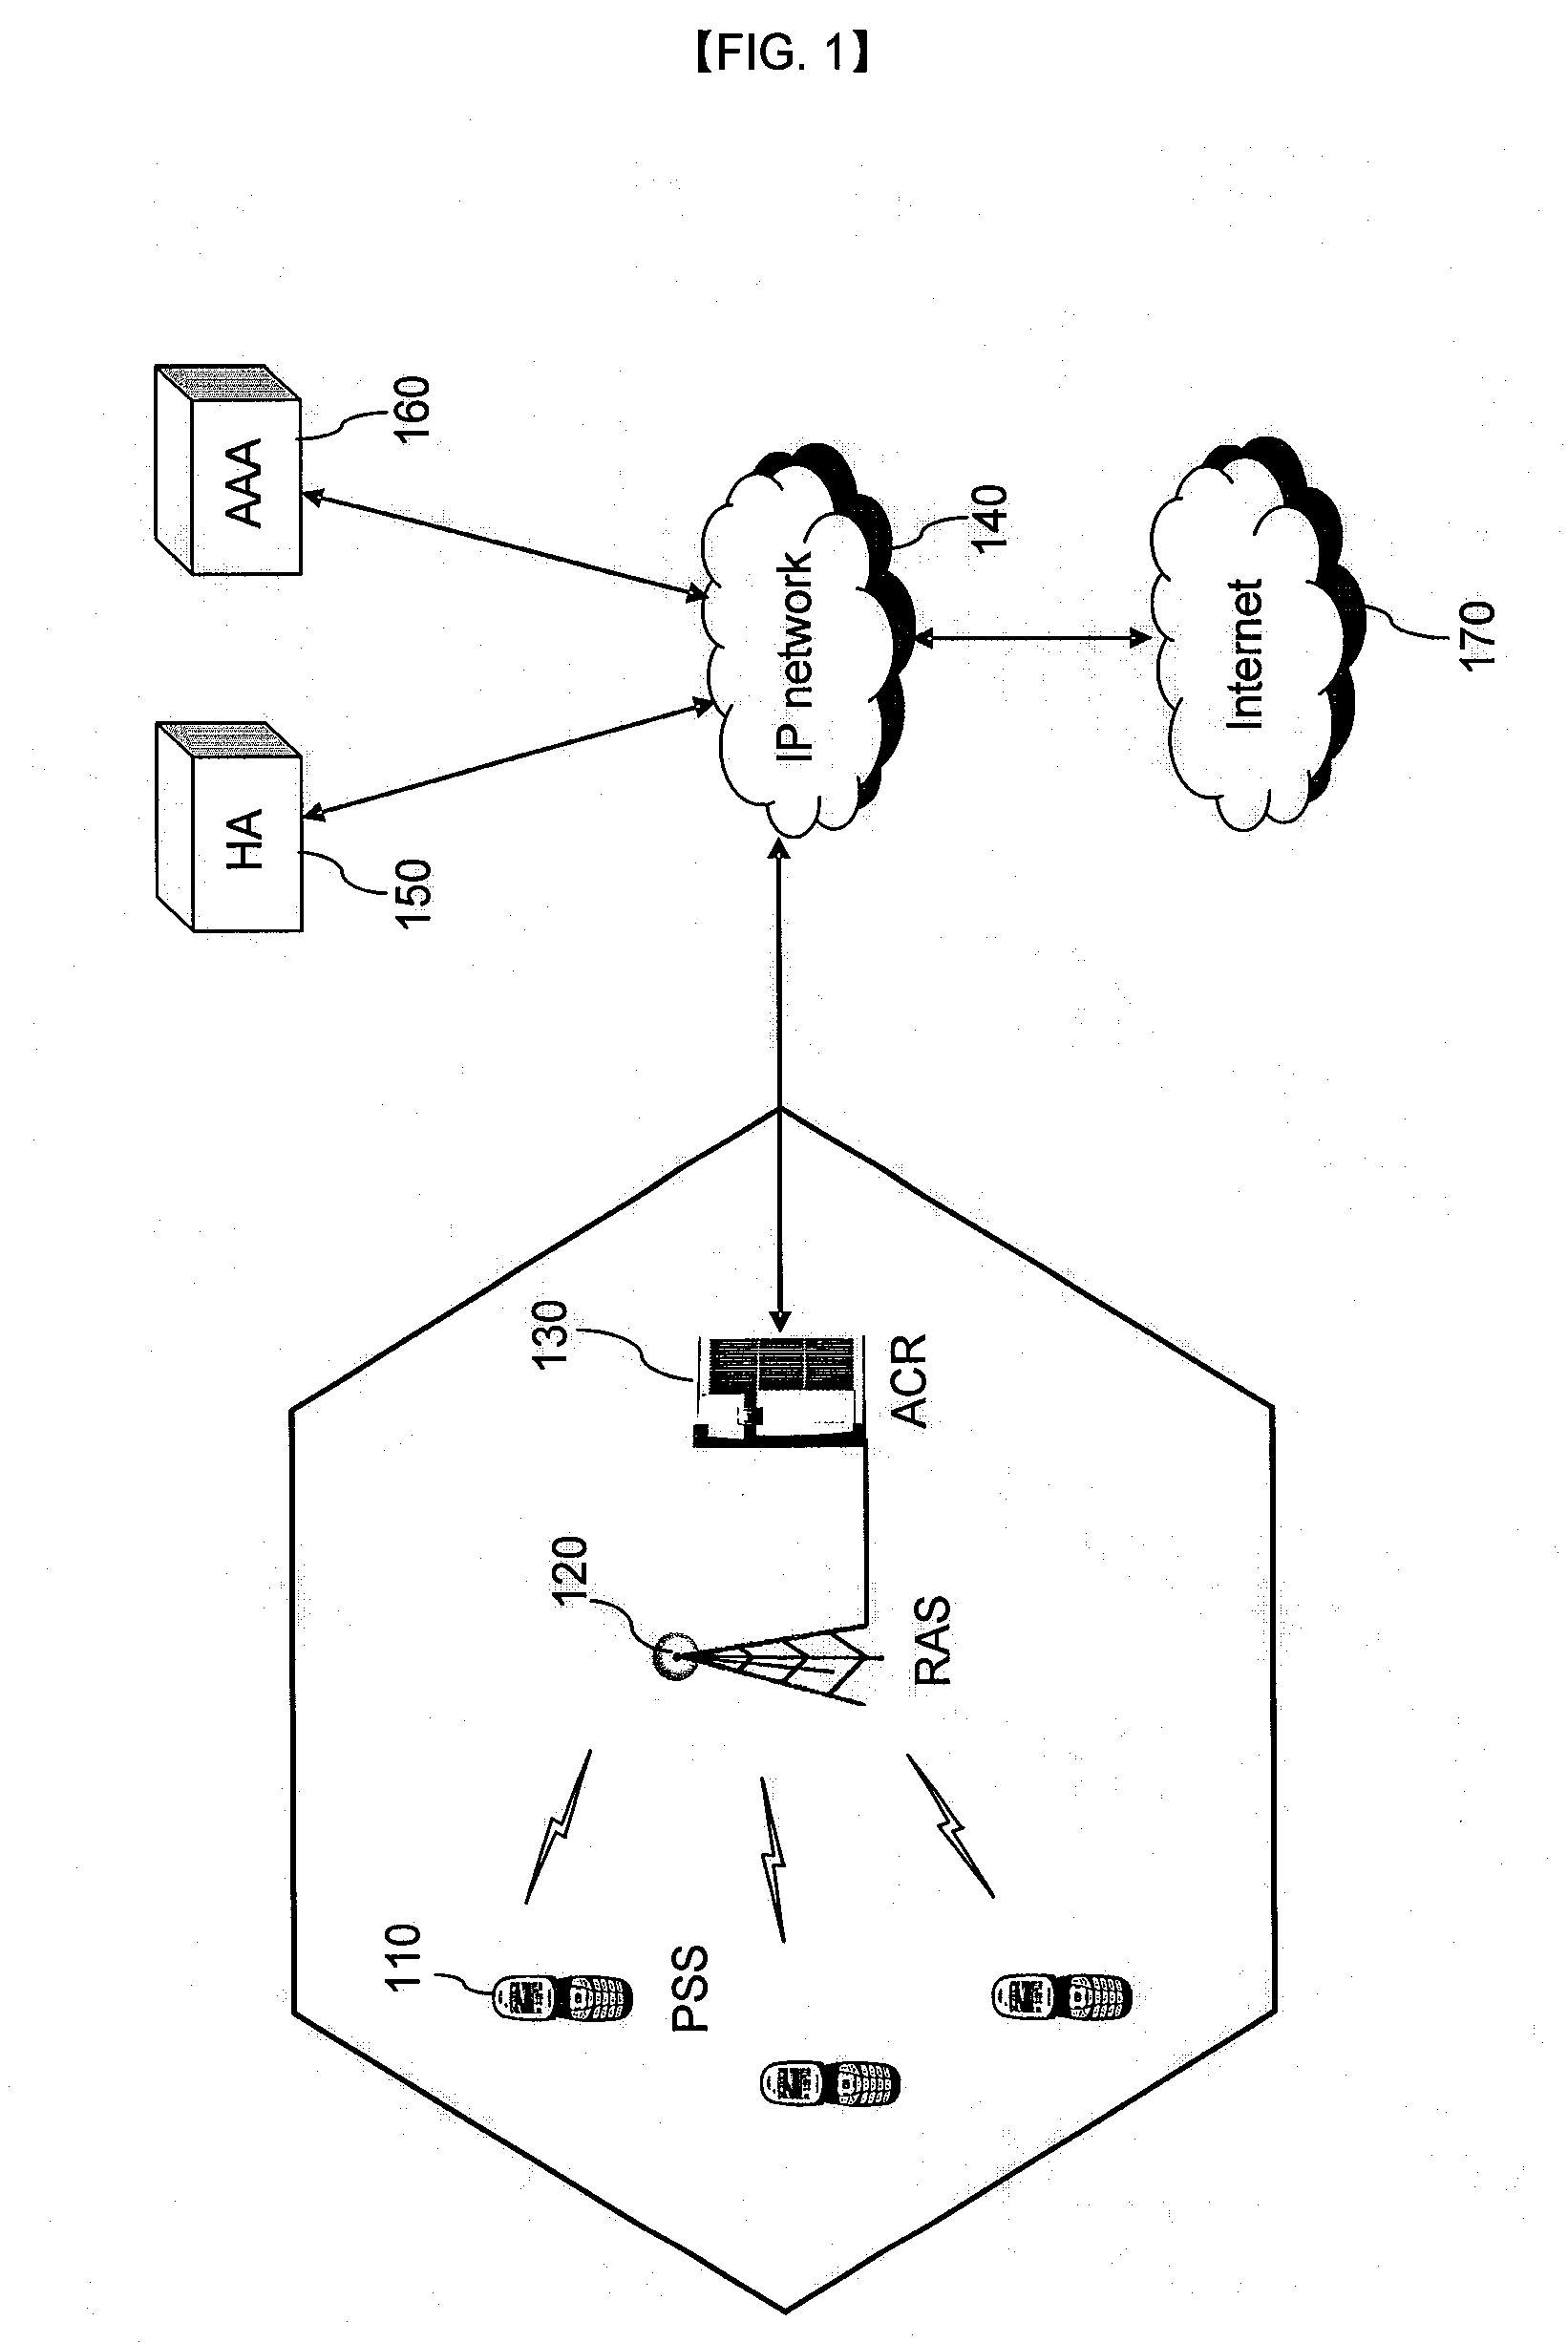 Method for Ranging with Bandwidth Request Code